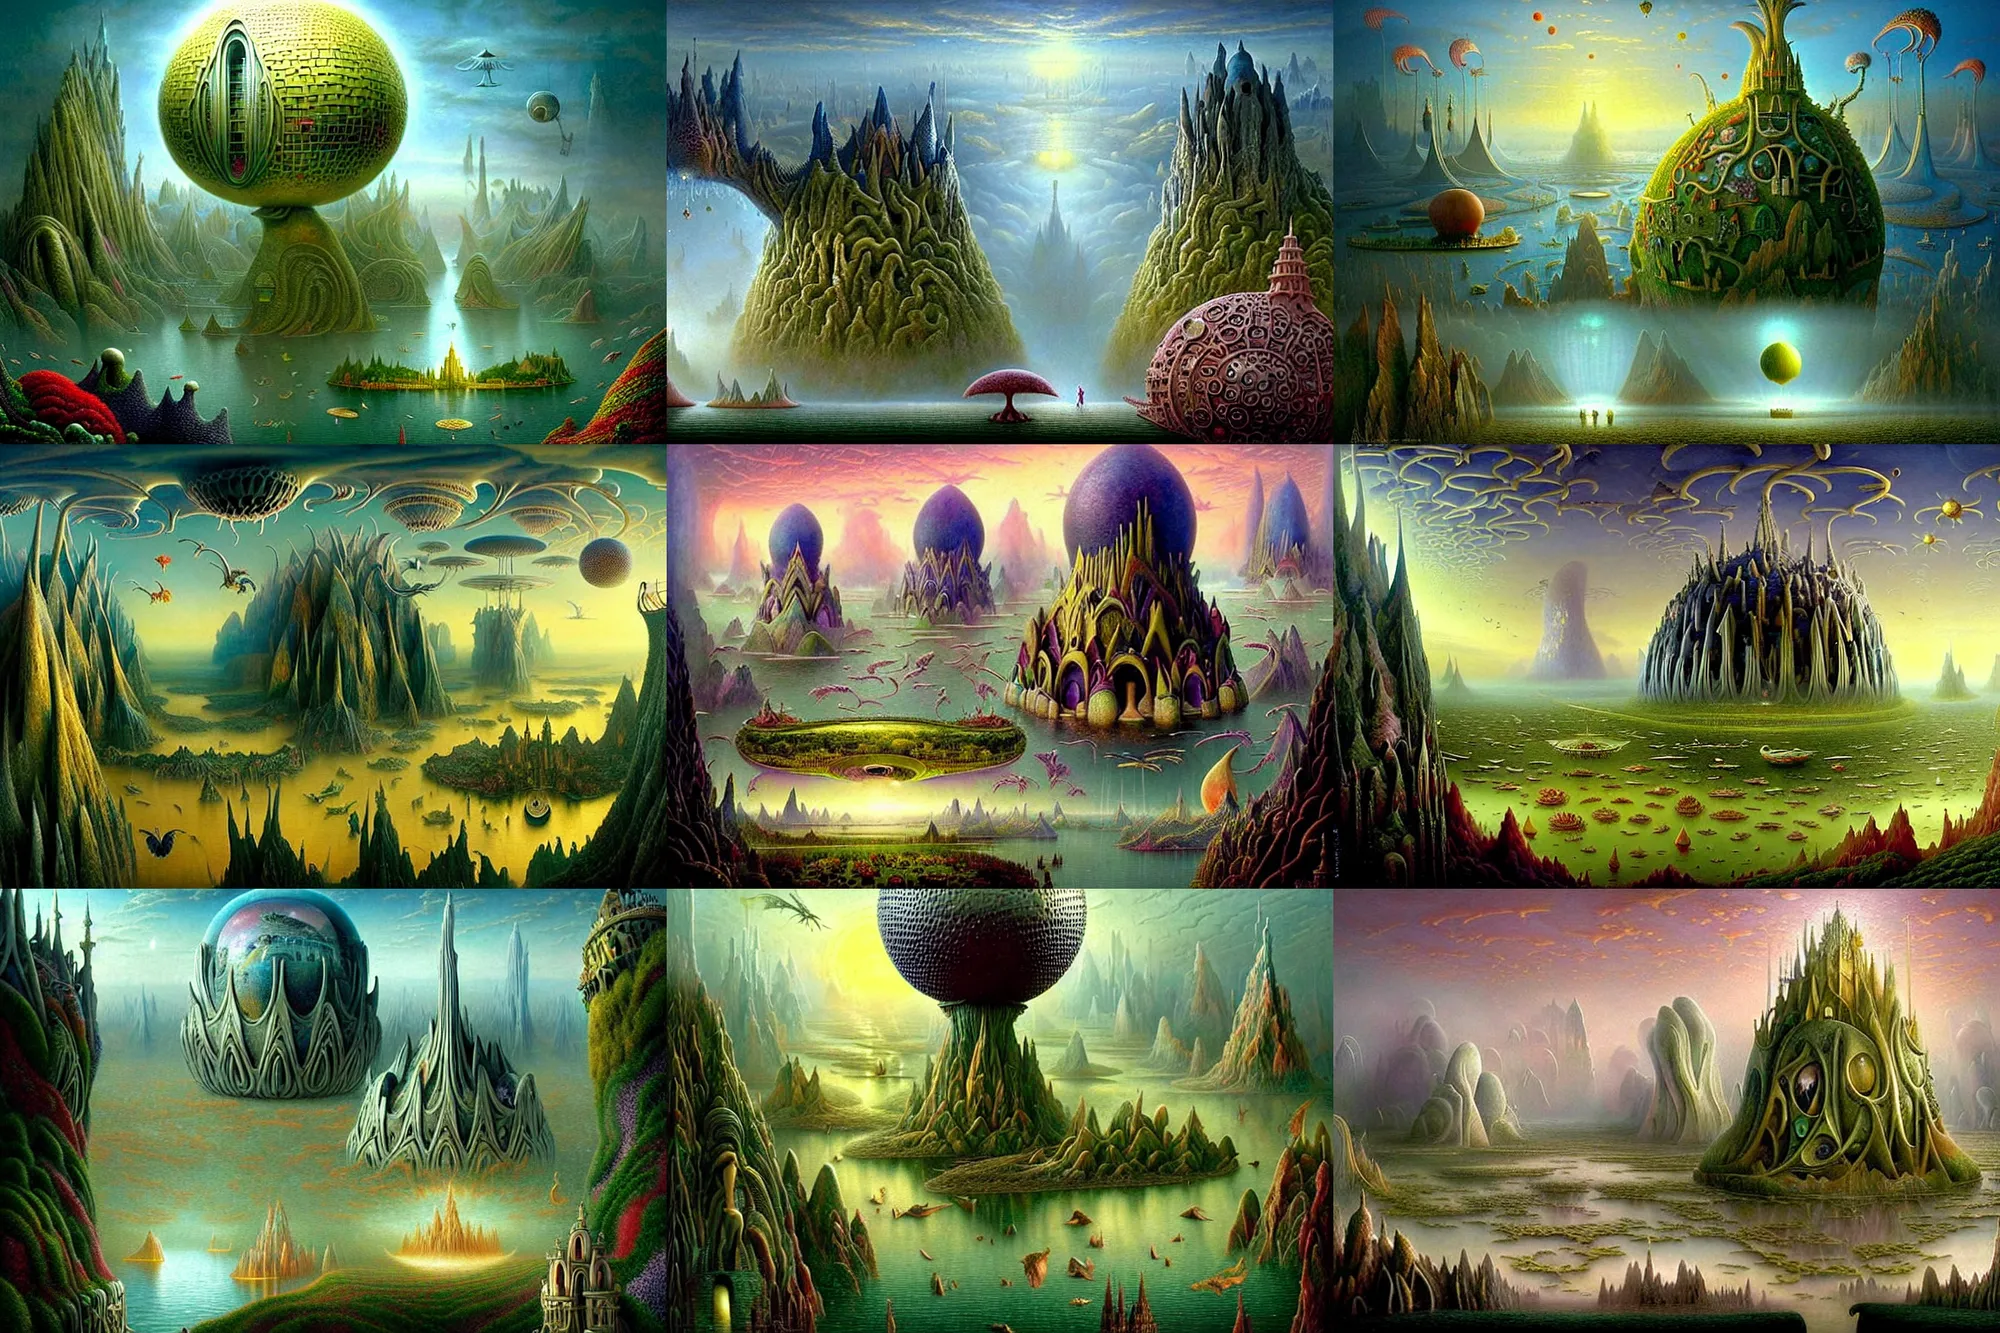 Prompt: a beautiful epic stunning amazing and insanely detailed matte painting of alien dream worlds with surreal architecture designed by Heironymous Bosch, mega structures inspired by Heironymous Bosch's Garden of Earthly Delights, vast surreal landscape and horizon by Andrew Ferez and Thomas Kinkade, masterpiece!!, grand!, imaginative!!!, whimsical!!, epic scale, intricate details, sense of awe, elite, wonder, insanely complex, masterful composition, sharp focus, dramatic lighting